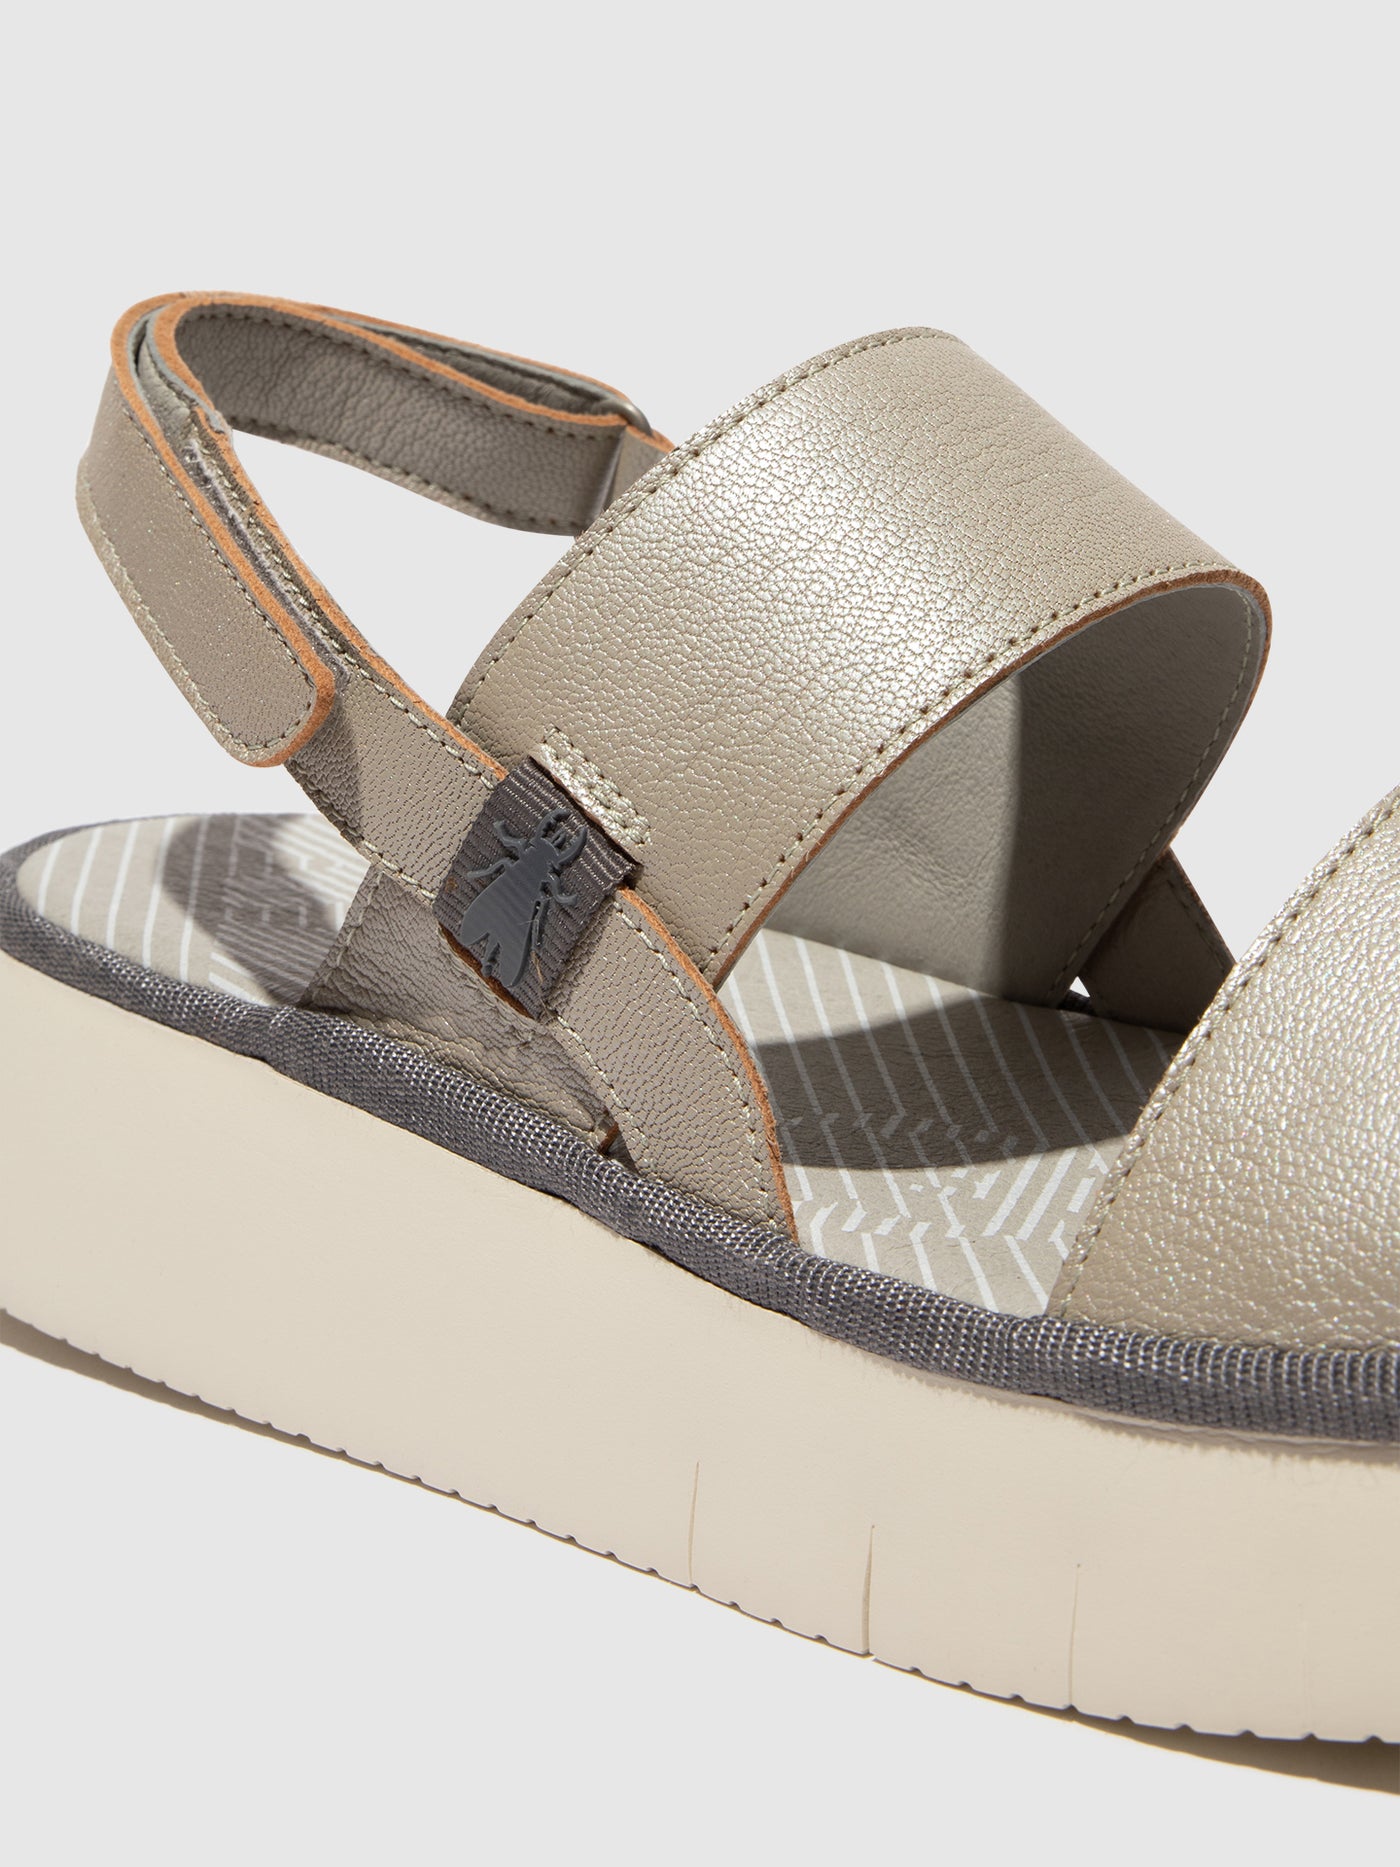 Sling-Back Sandals CURA318FLY SILVER